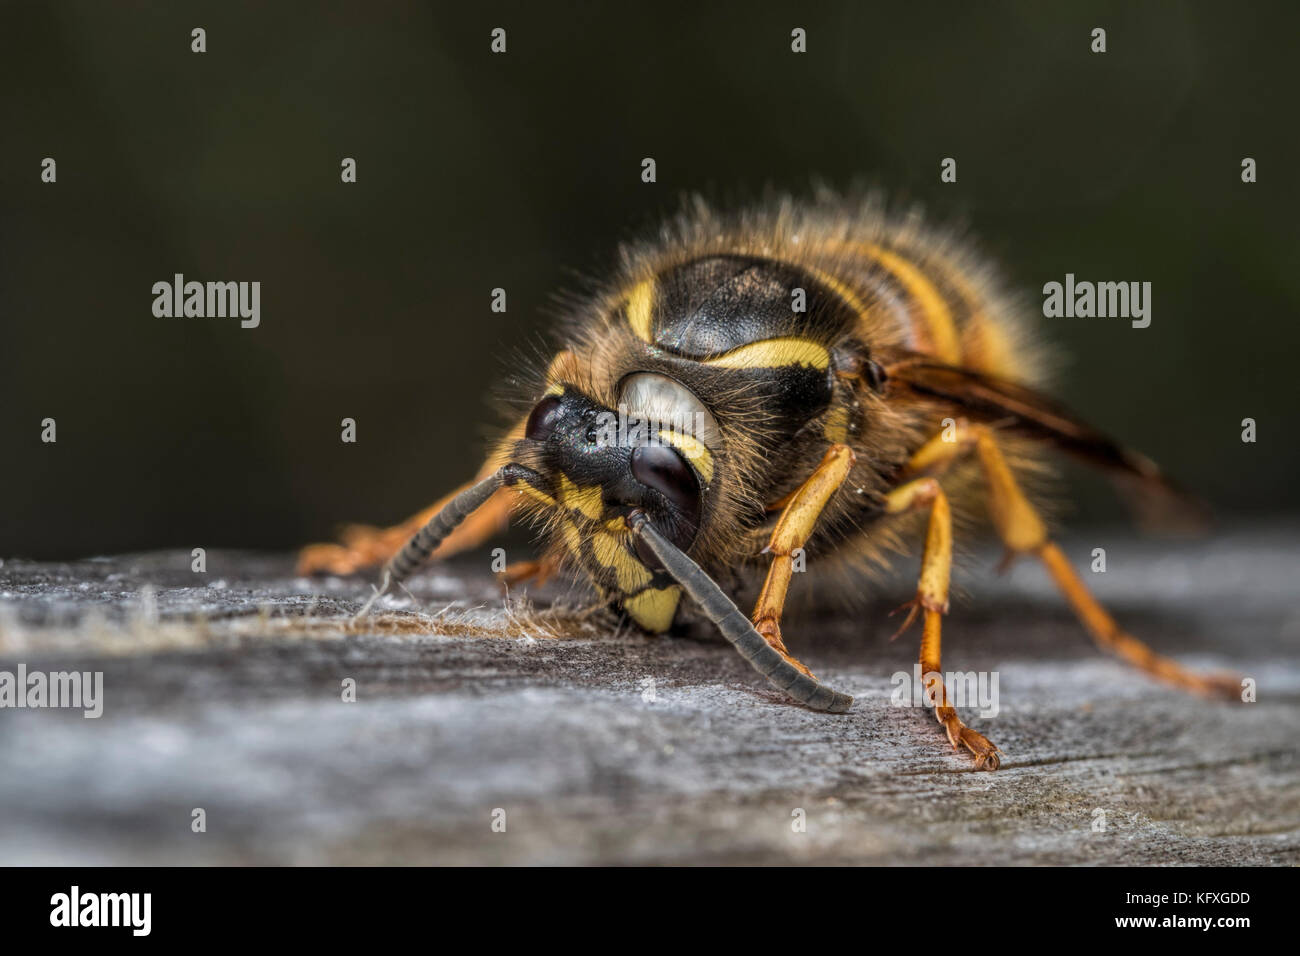 Norwegian Wasp (Dolichovespula norwegica) gathering wood from a fencepost for its nest. Tipperary, Ireland Stock Photo